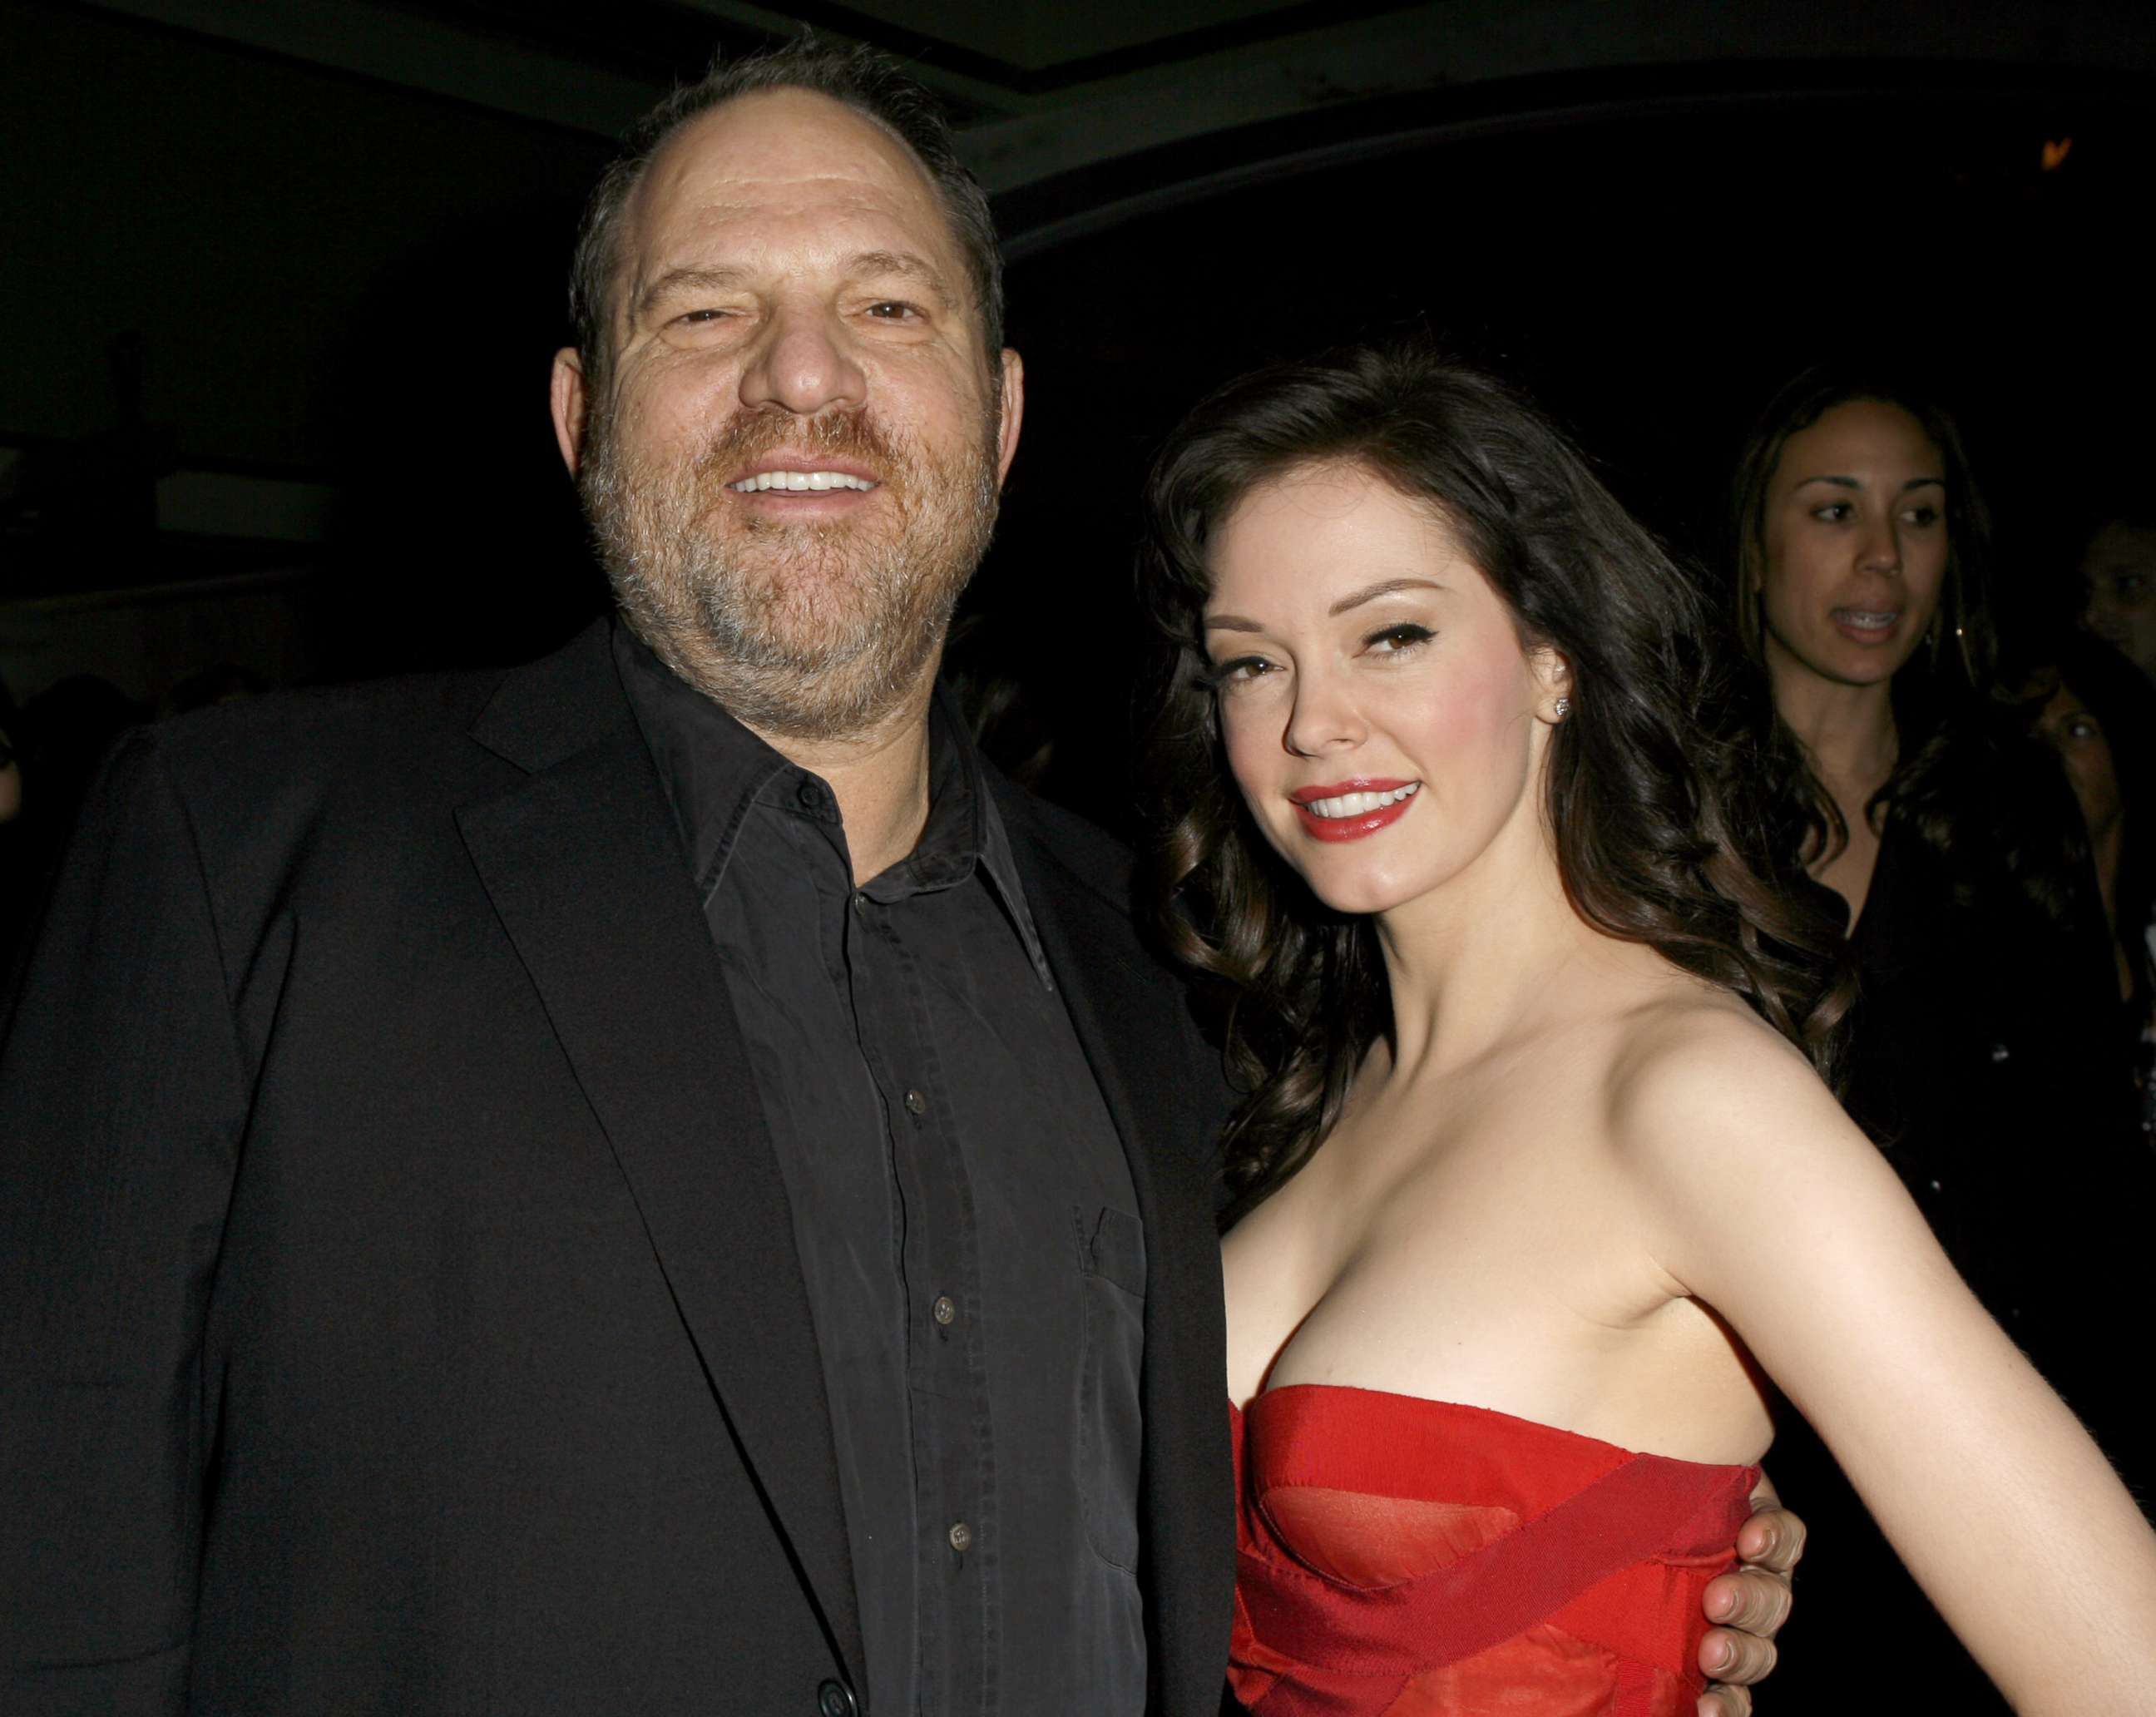 PHOTO: Harvey Weinstein and Rose McGowan during "Grindhouse" Los Angeles Premiere in Los Angeles, March 26, 2007. 